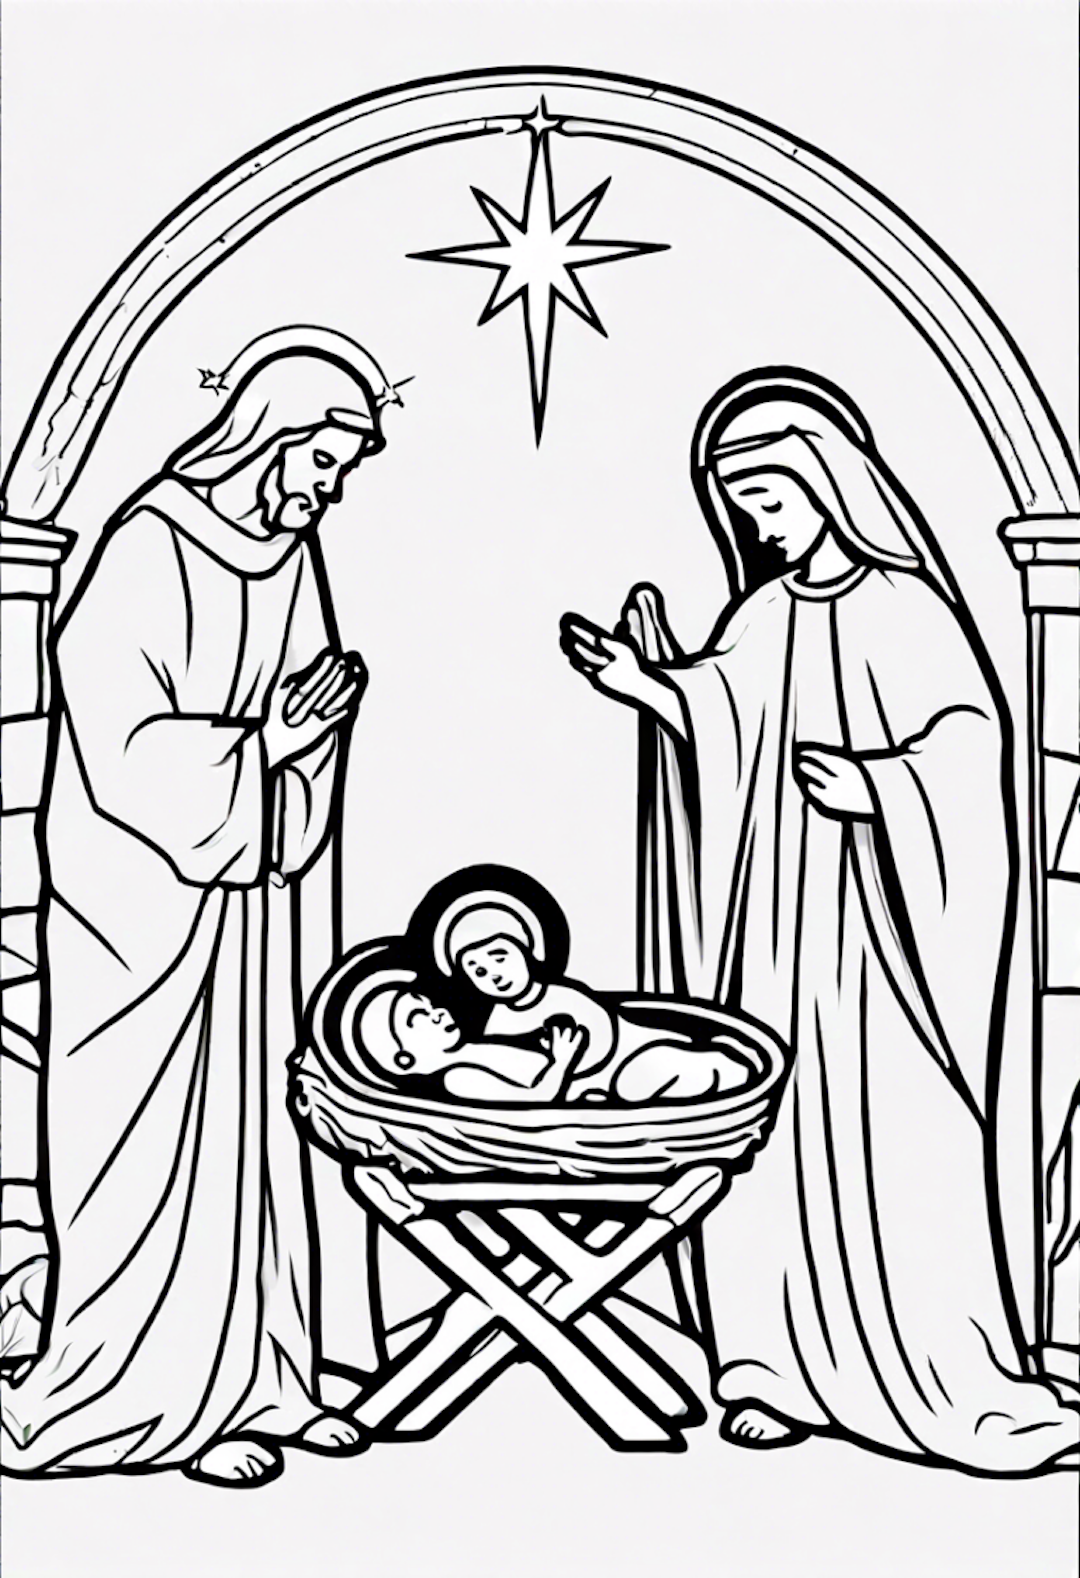 Nativity Scene coloring pages